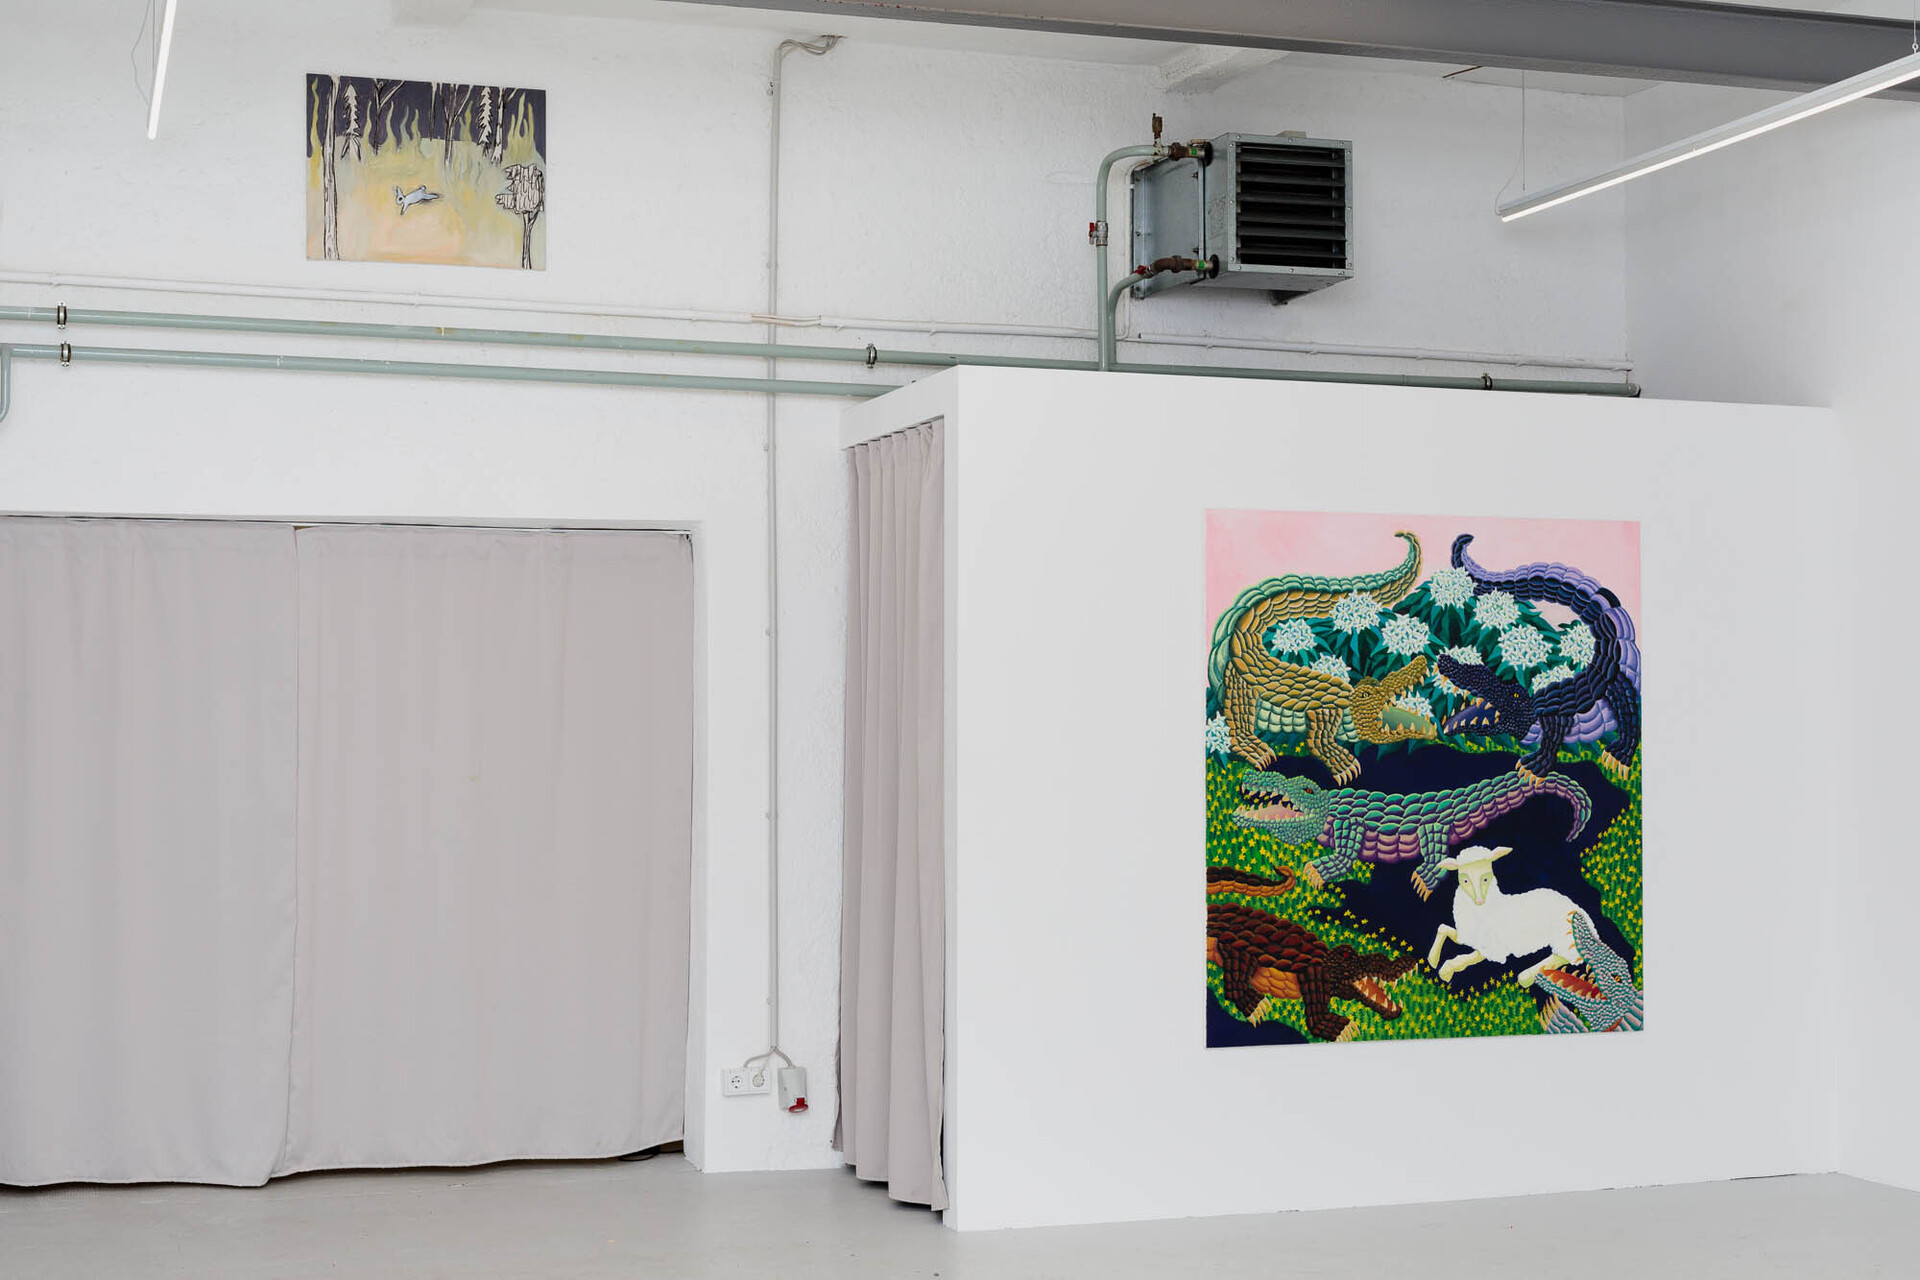 Boris Saccone, Lauf Hase, 58 x 74.5 cm, Oil and charcoal on canvas, 2022; Jimmy Vuong, Trostlos, Herzlos und Hoffnungslos, Oil on canvas,160 x 150 cm, 2022 (left to right)